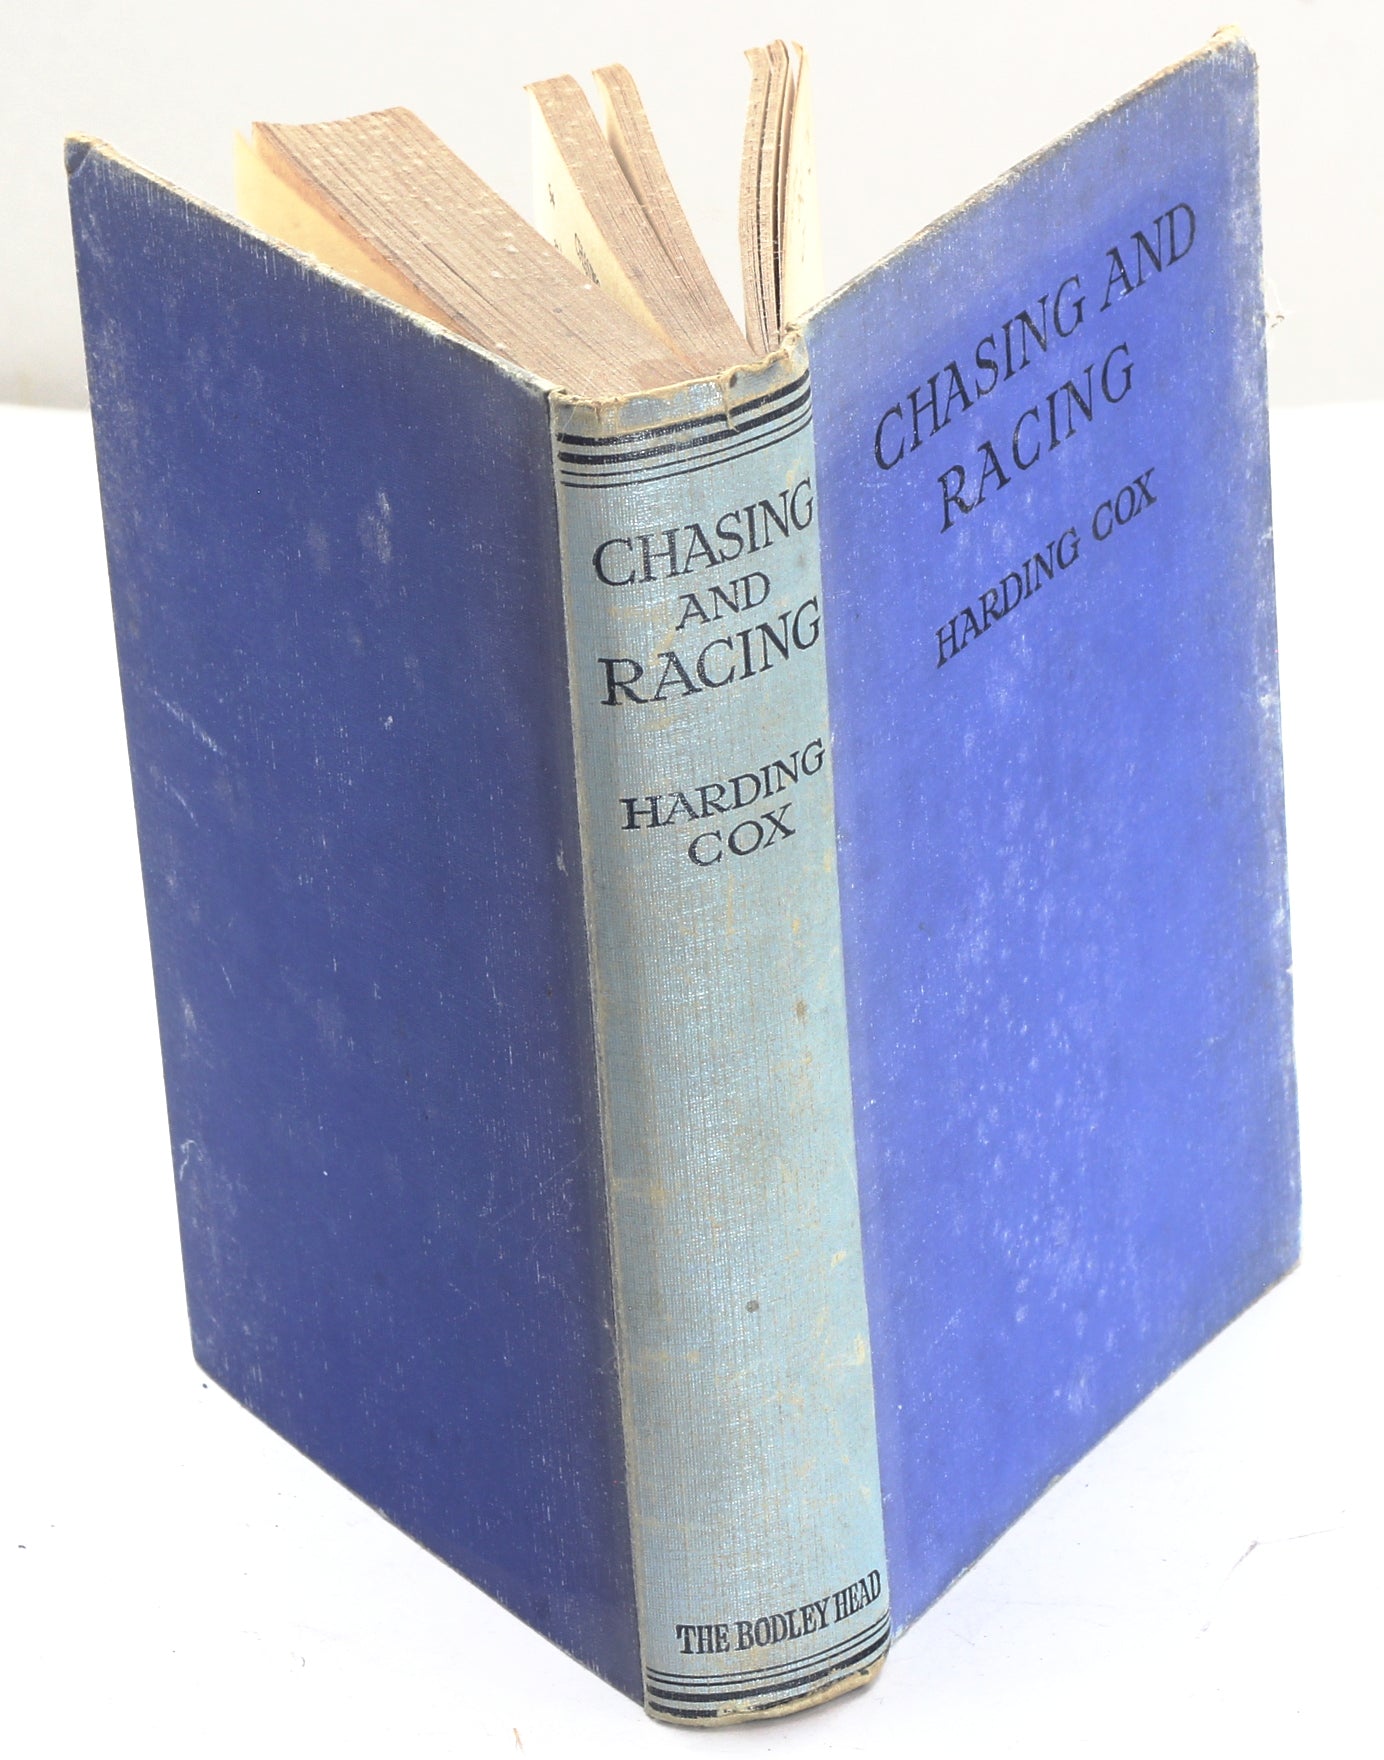 Chasing and Racing by Harding Cox